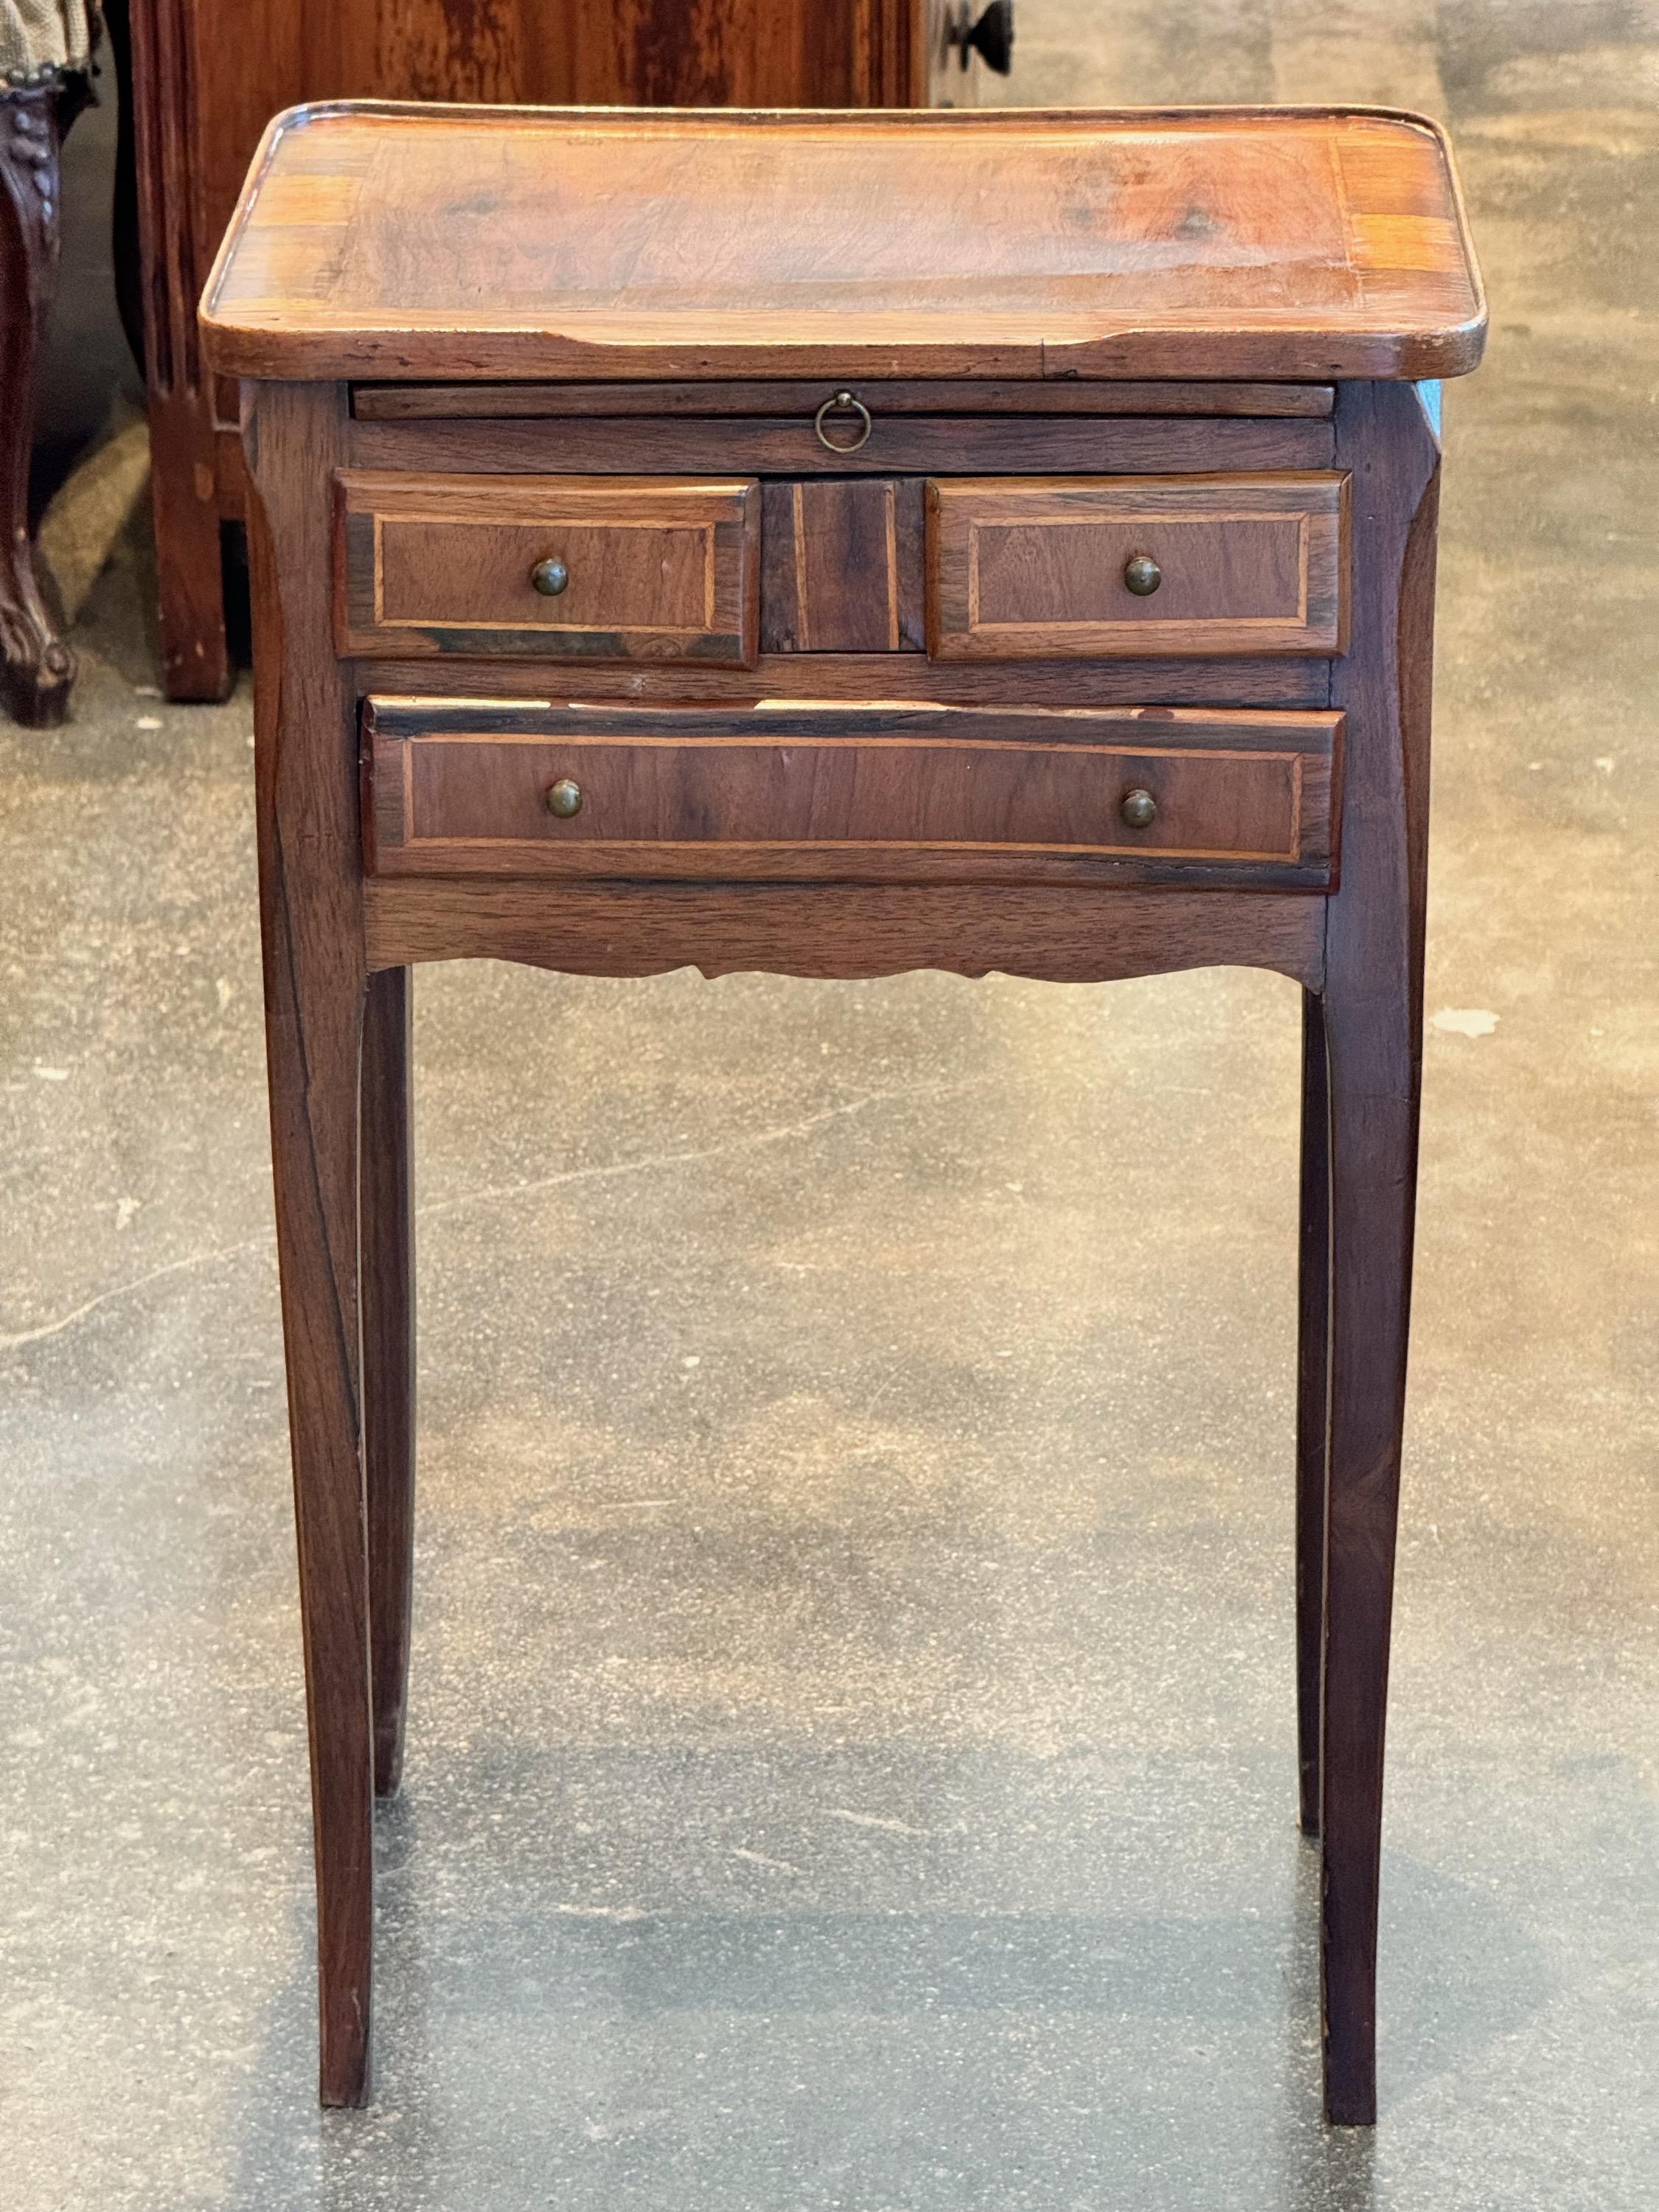 A cute French side table. This piece has three drawers and lots of charm.